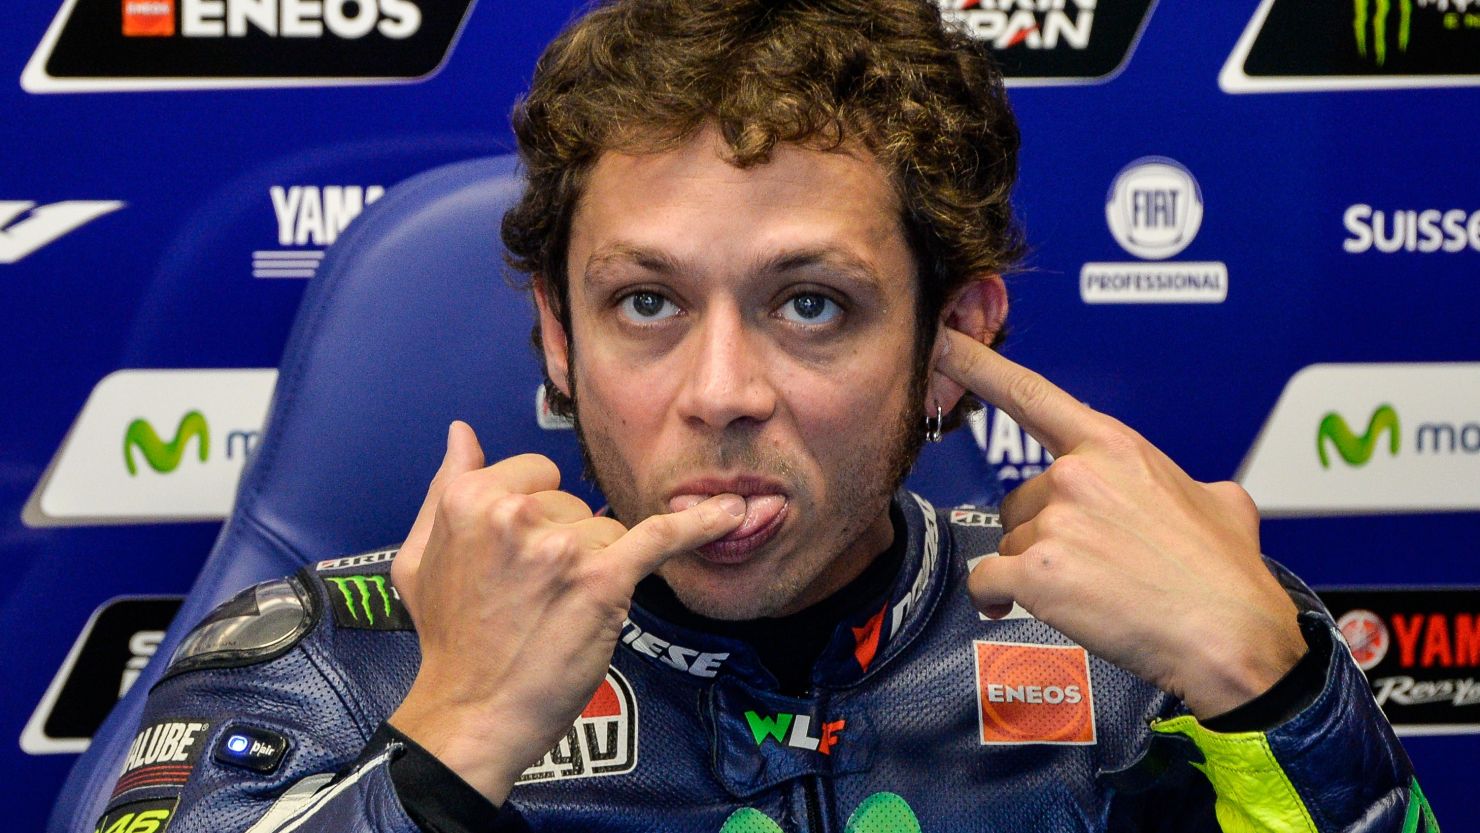 Valentino Rossi was left to rue a mistaken choice of tire in final qualifying for the Italian MotoGP at Mugello. 